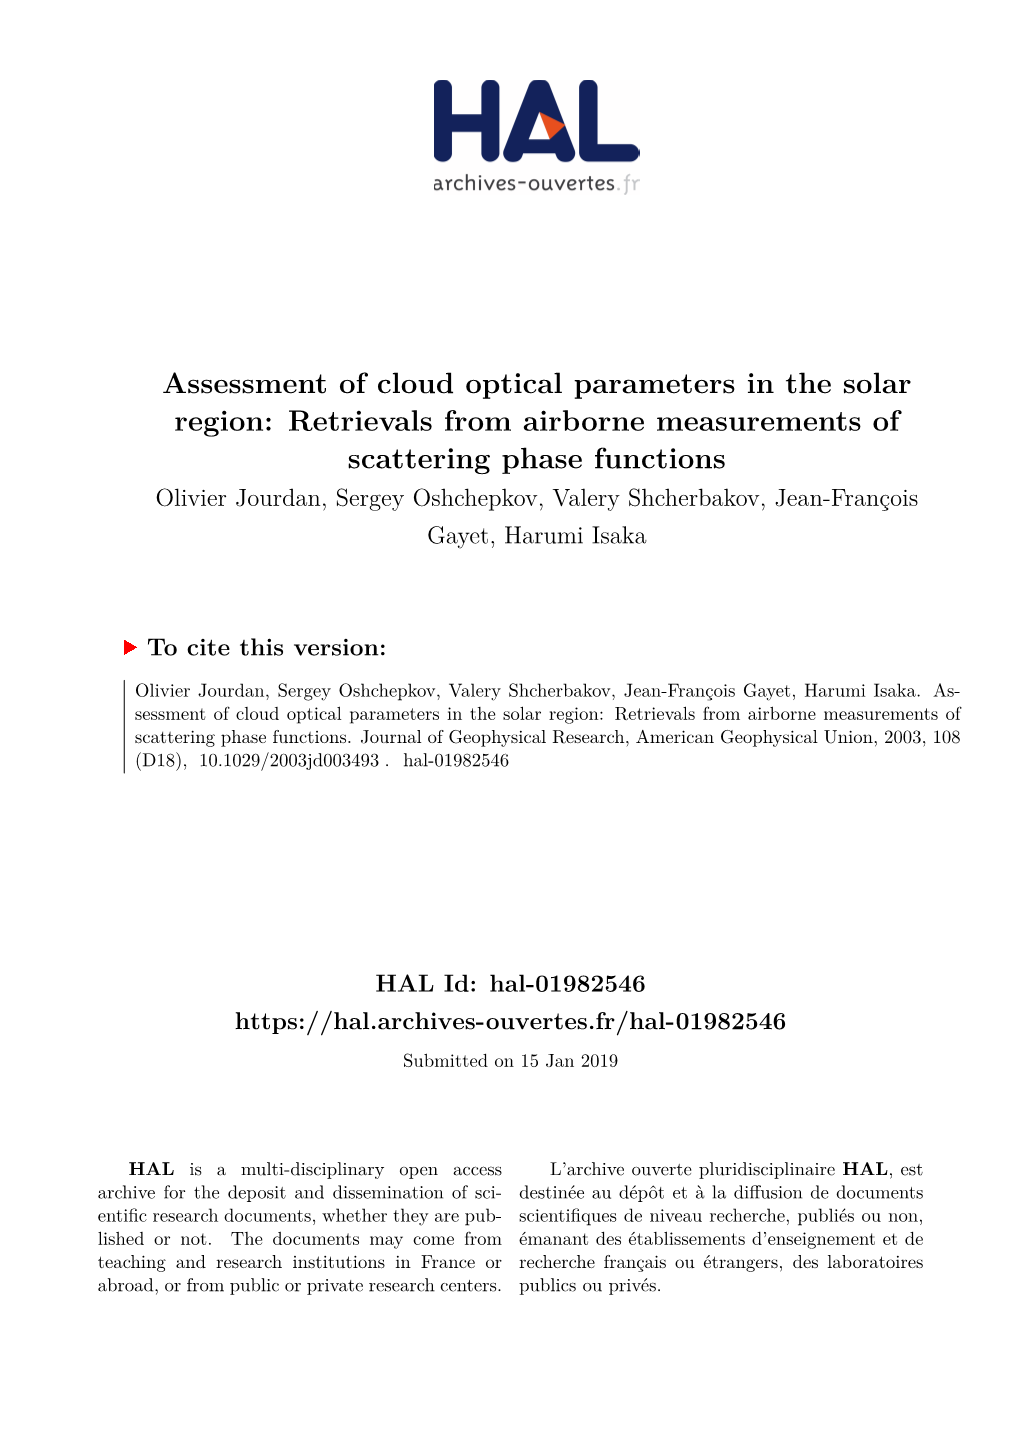 Assessment of Cloud Optical Parameters in the Solar Region